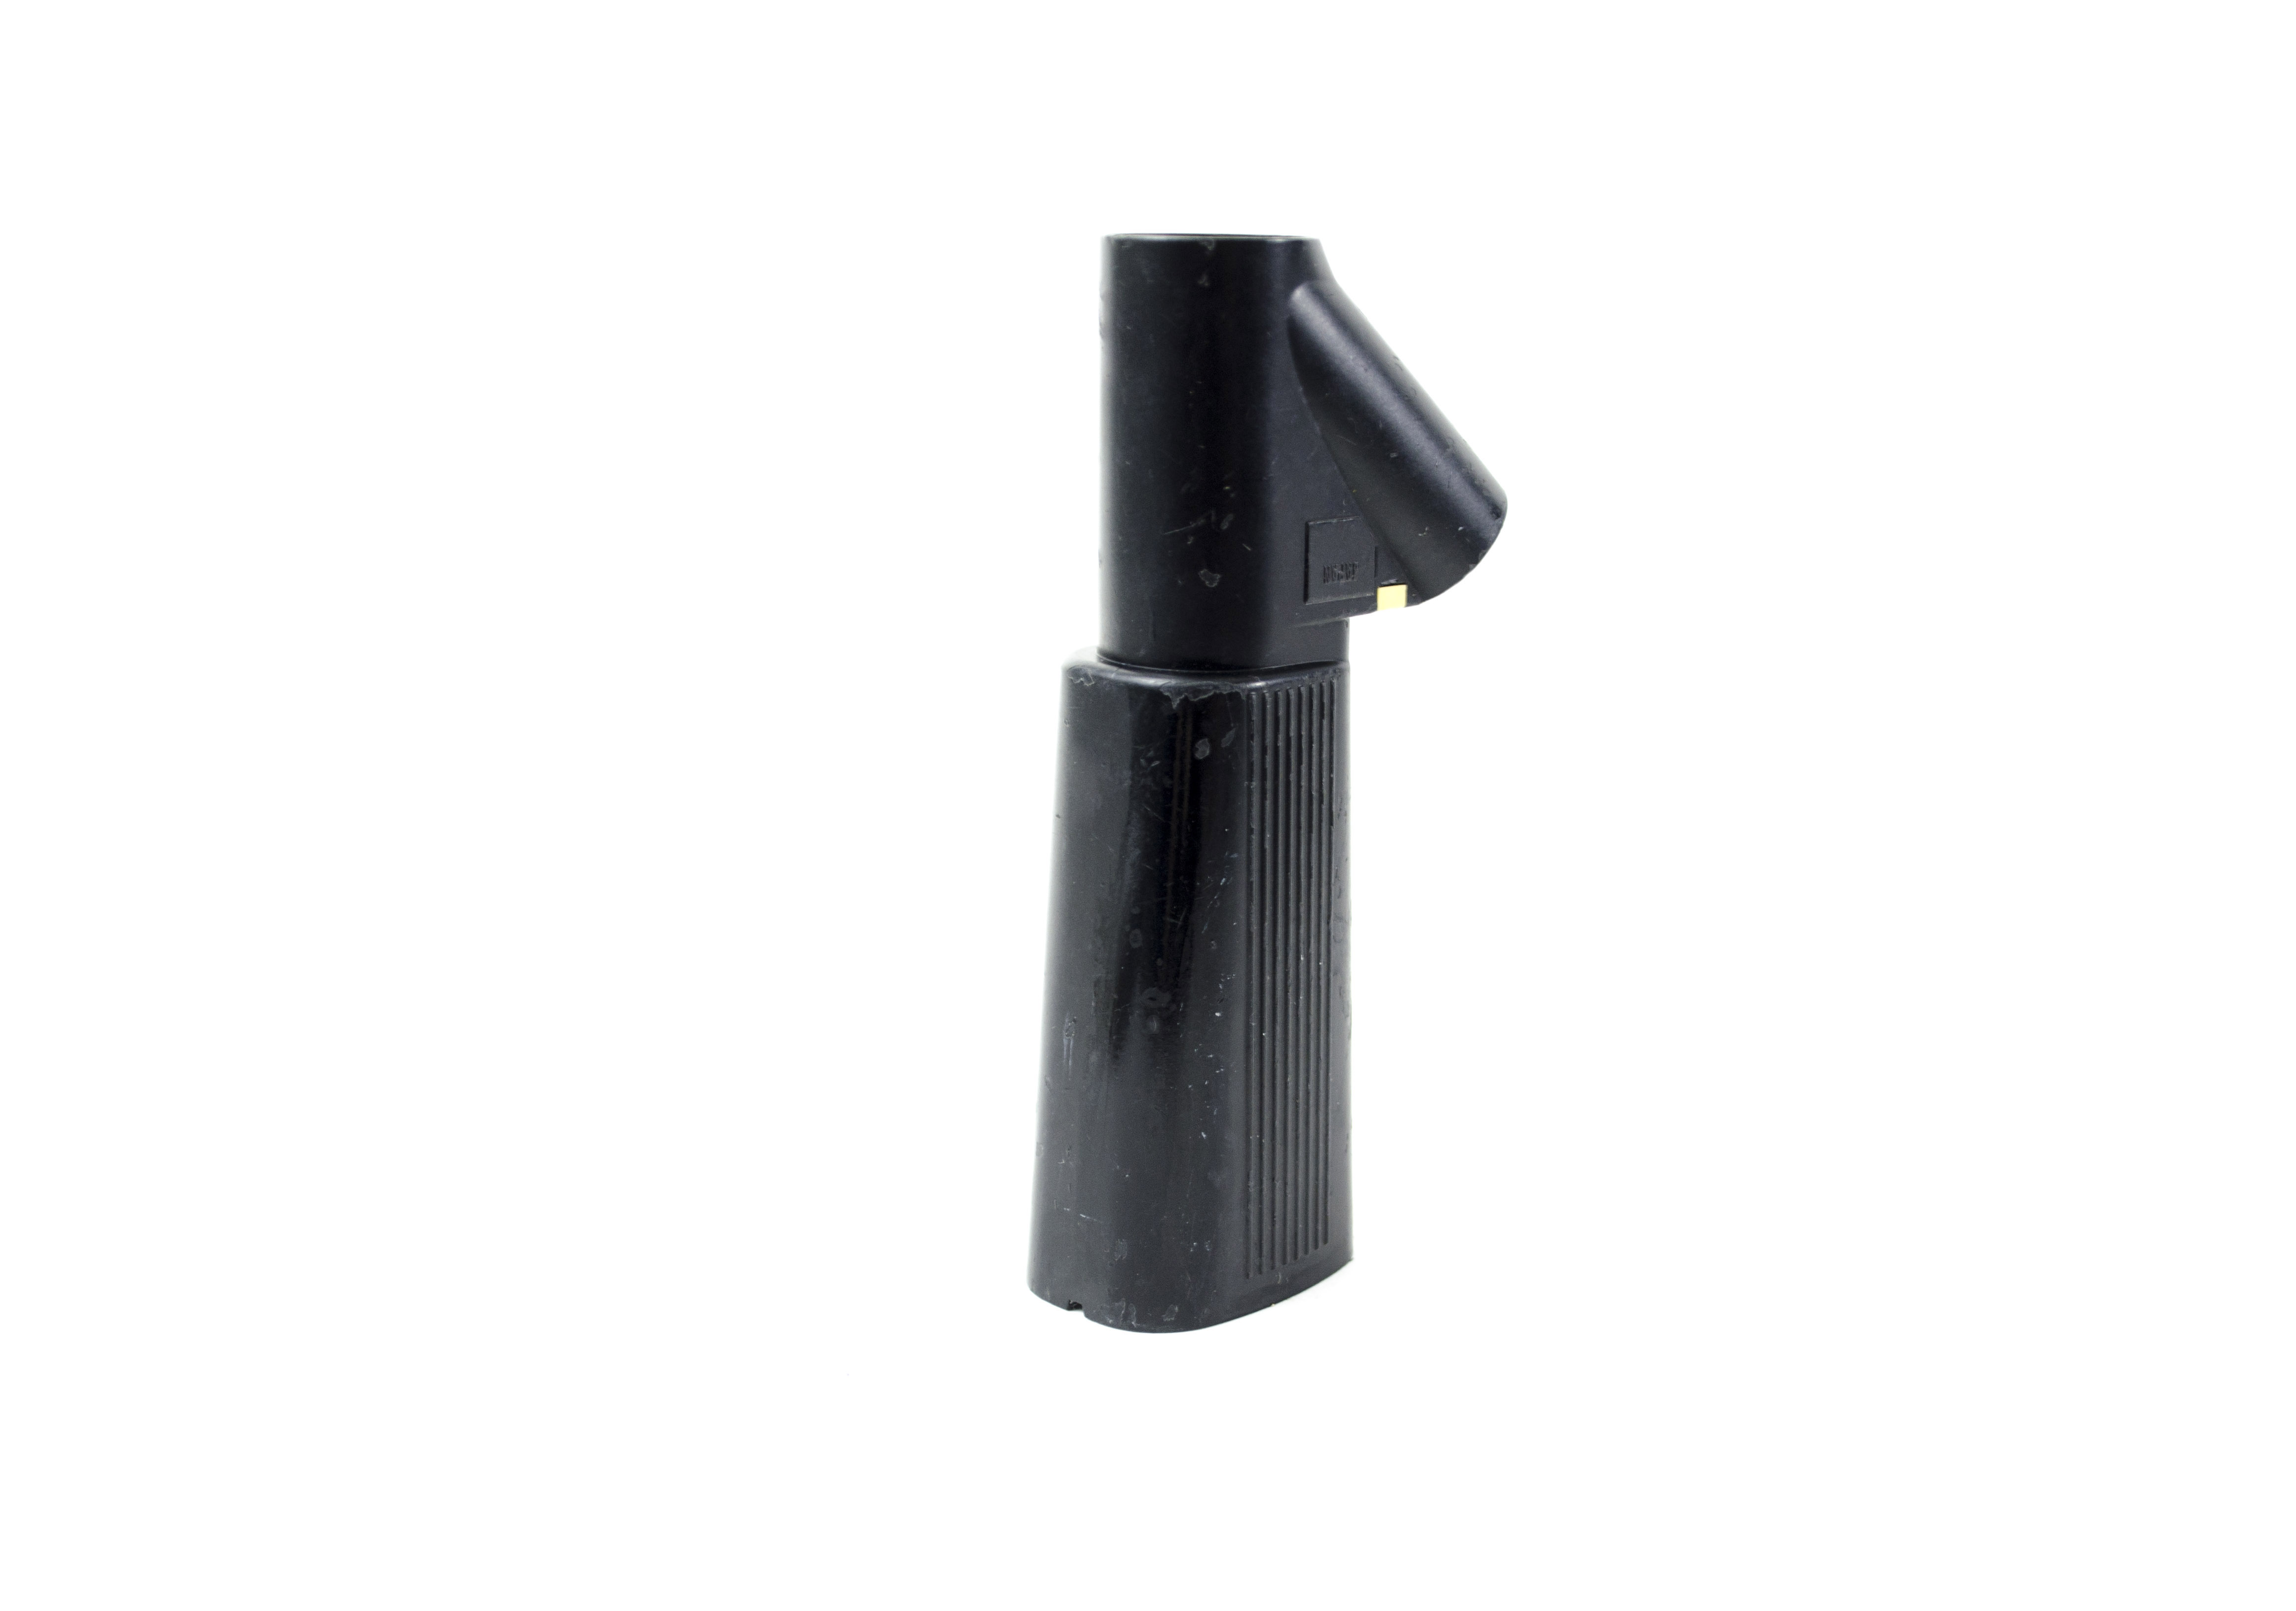 OEM Control Grip (Without Nameplate) - GIF-2T160, GIF-2T100